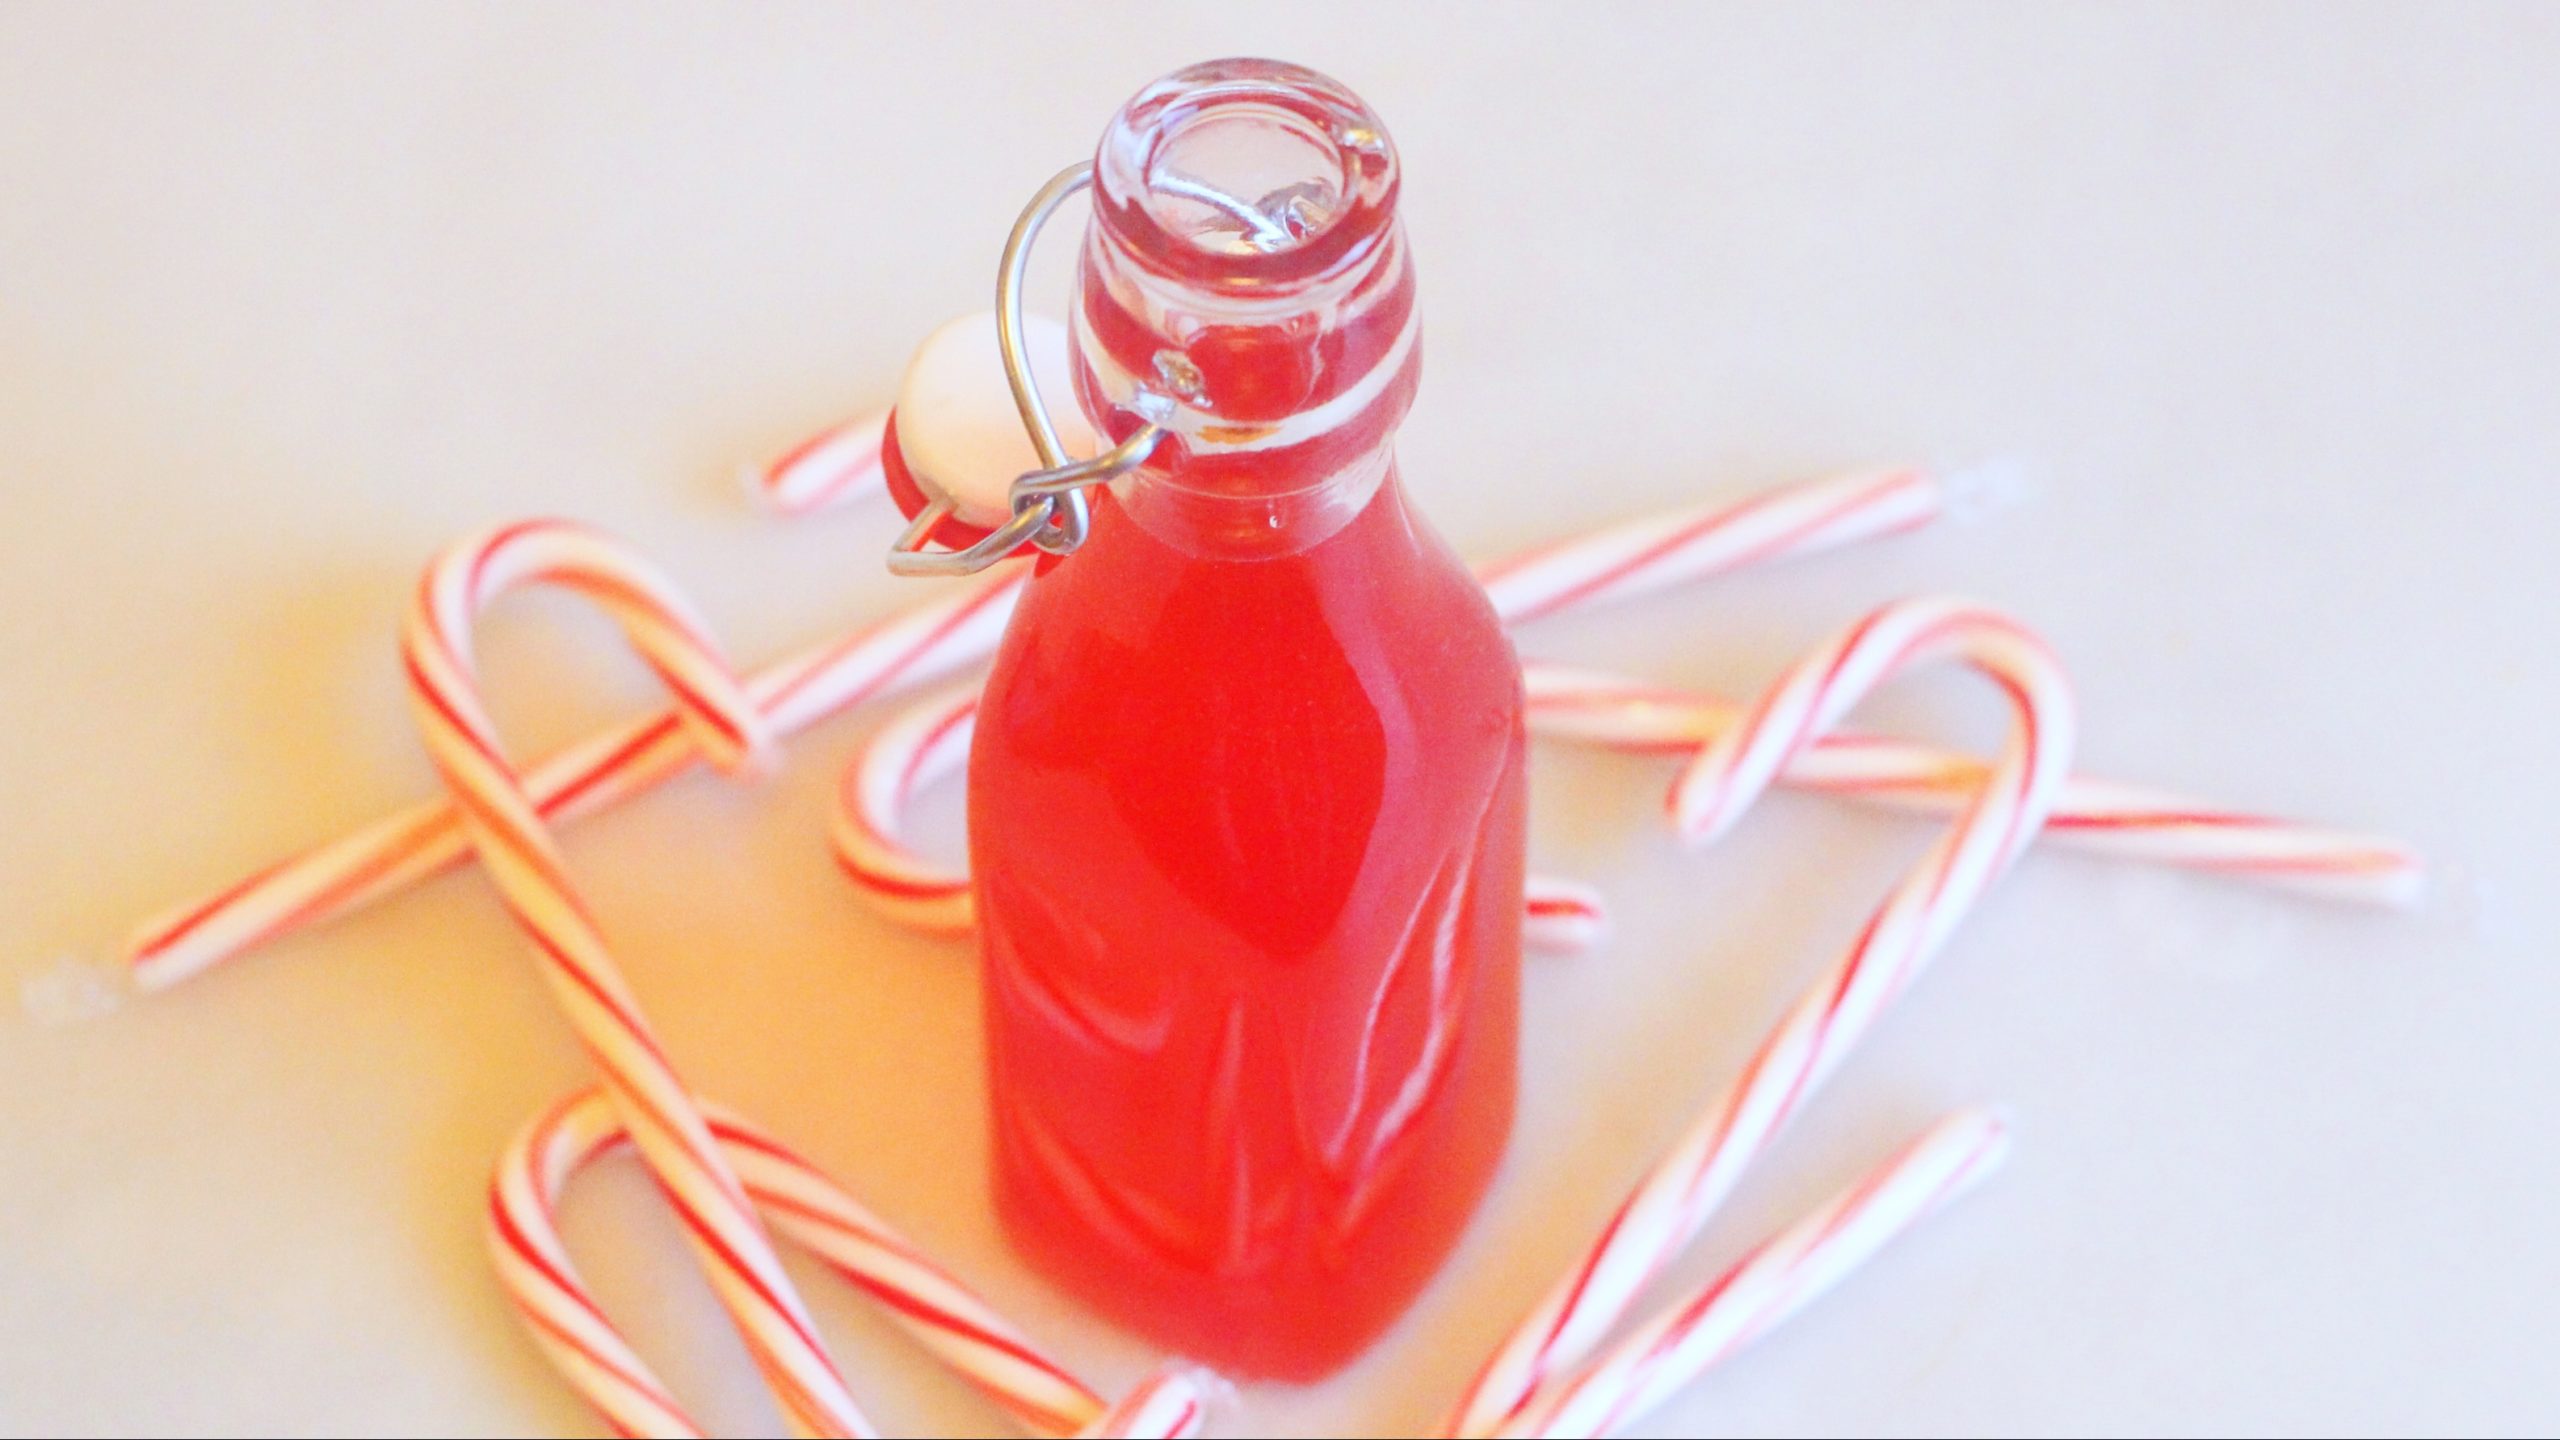 Add Christmas to Your Hot Drinks With This DIY Candy Cane Syrup